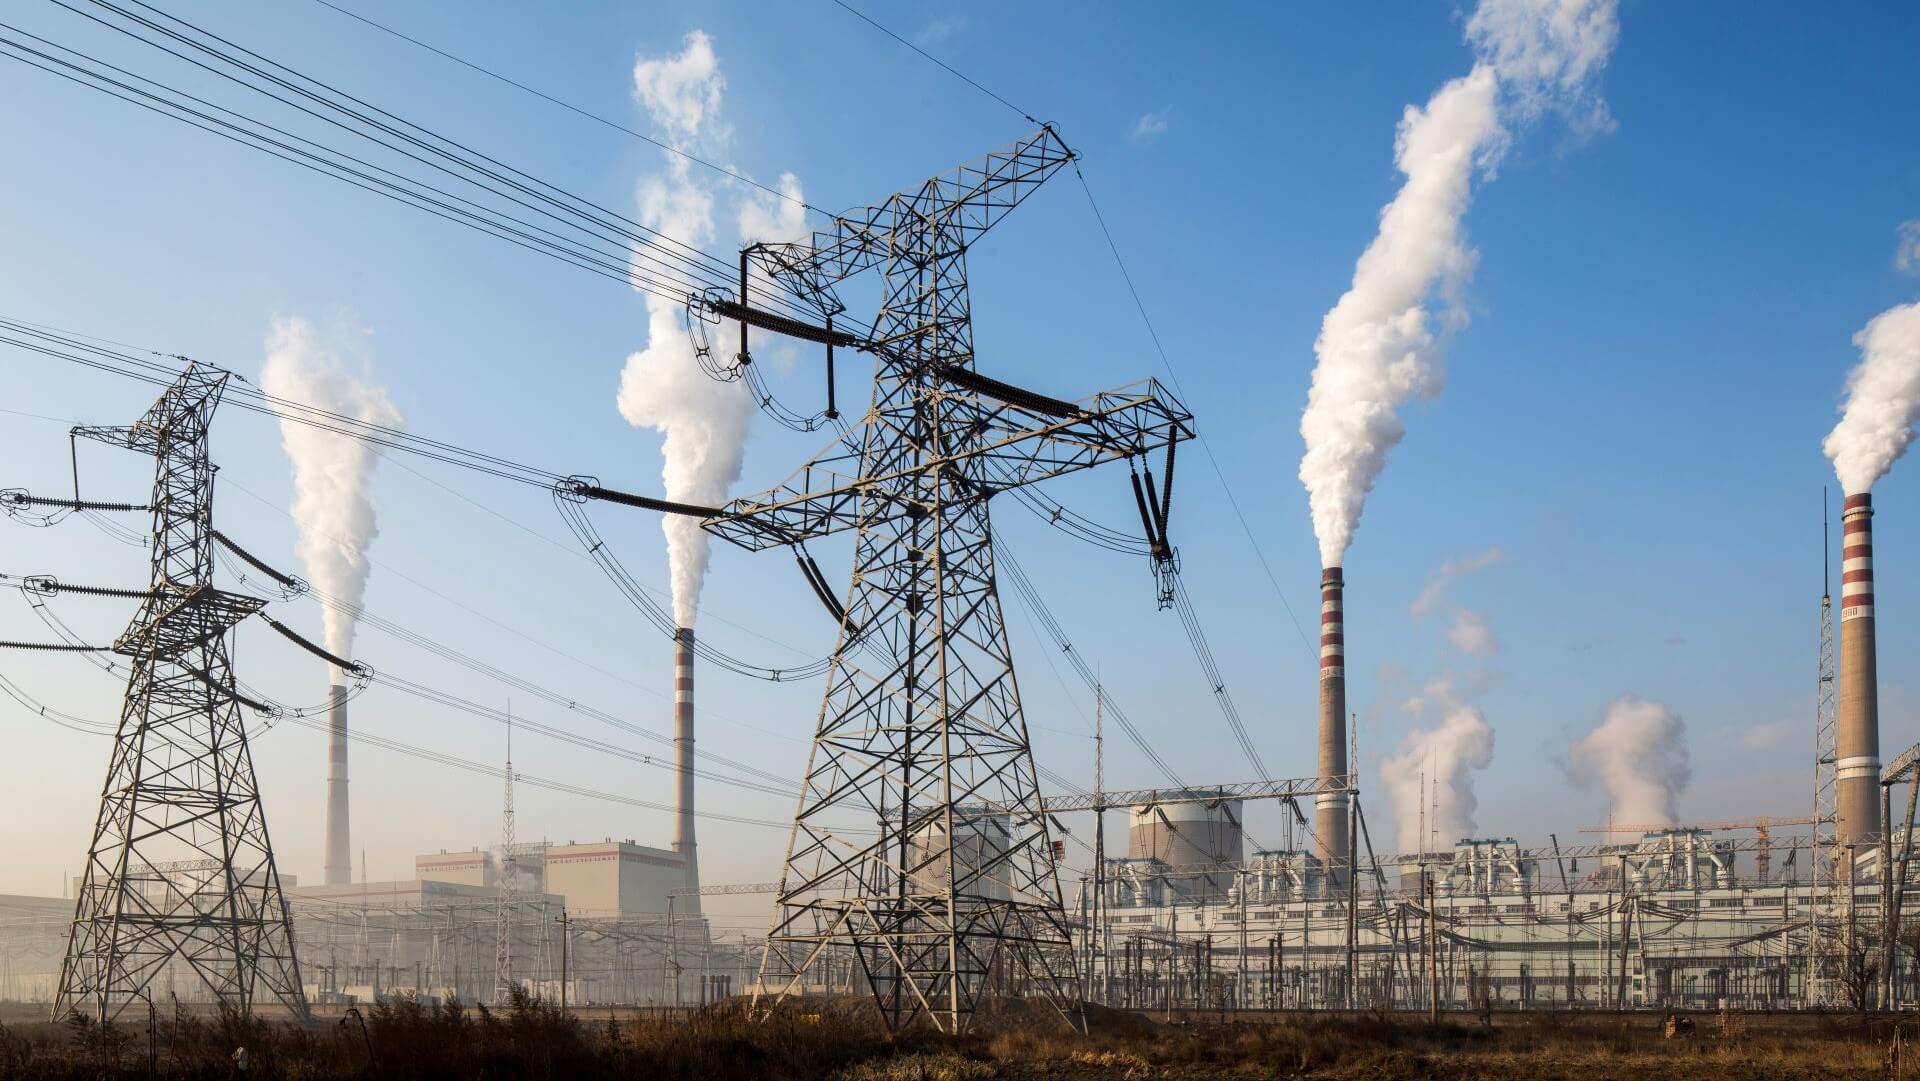 View of coal-fired power station and electricity transmission lines in China